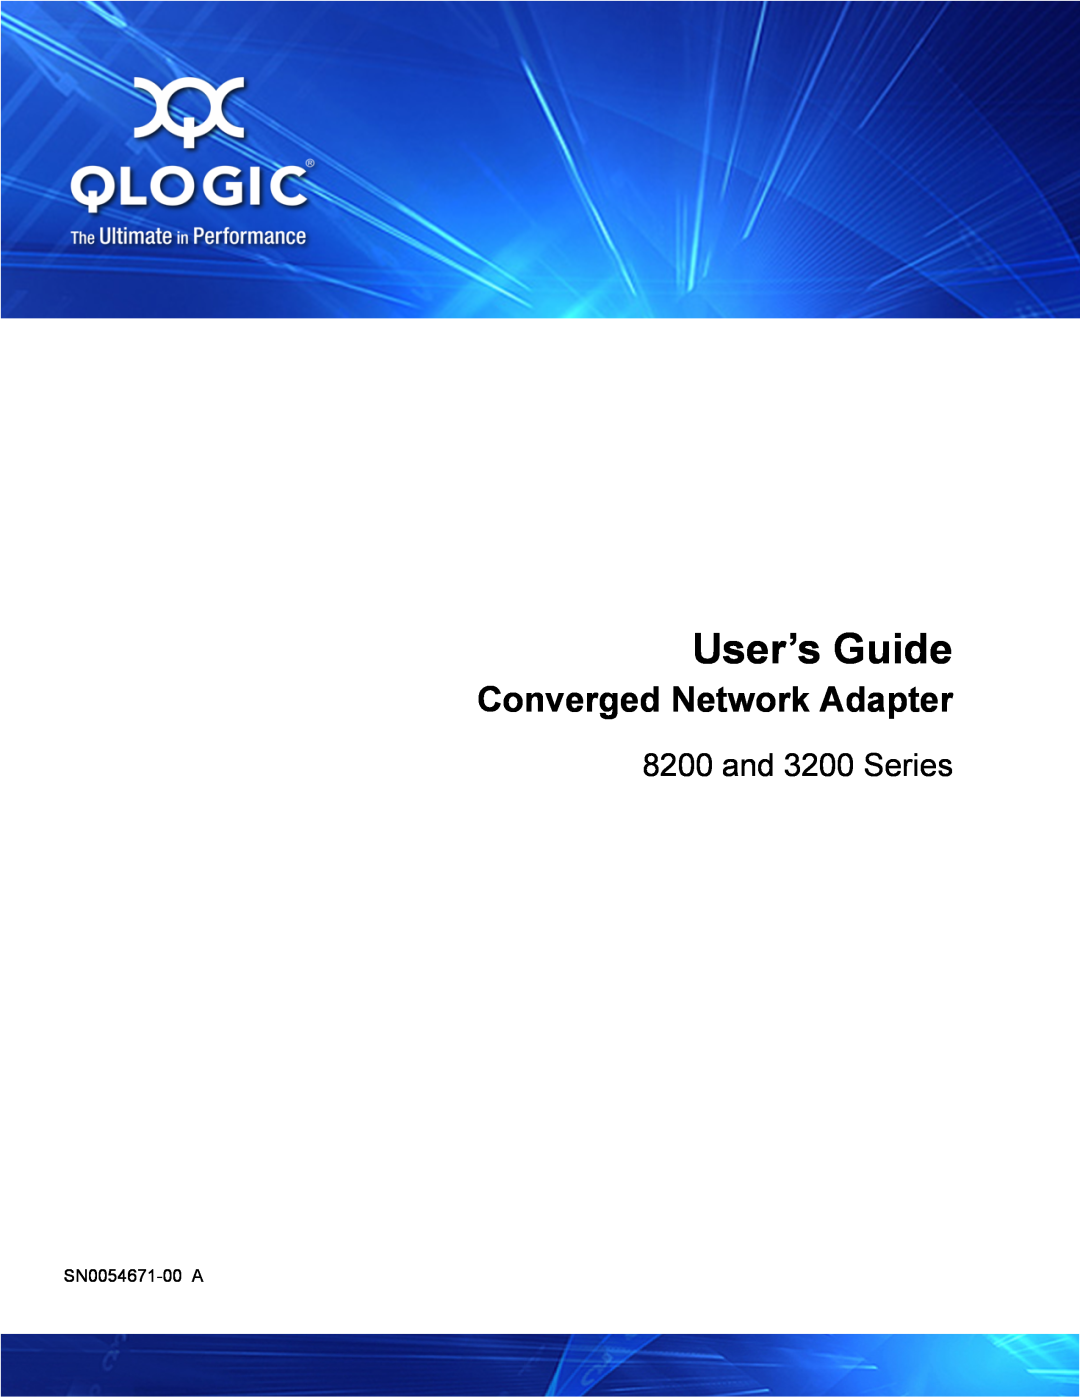 Q-Logic 8200 manual User’s Guide, Converged Network Adapter, and 3200 Series 